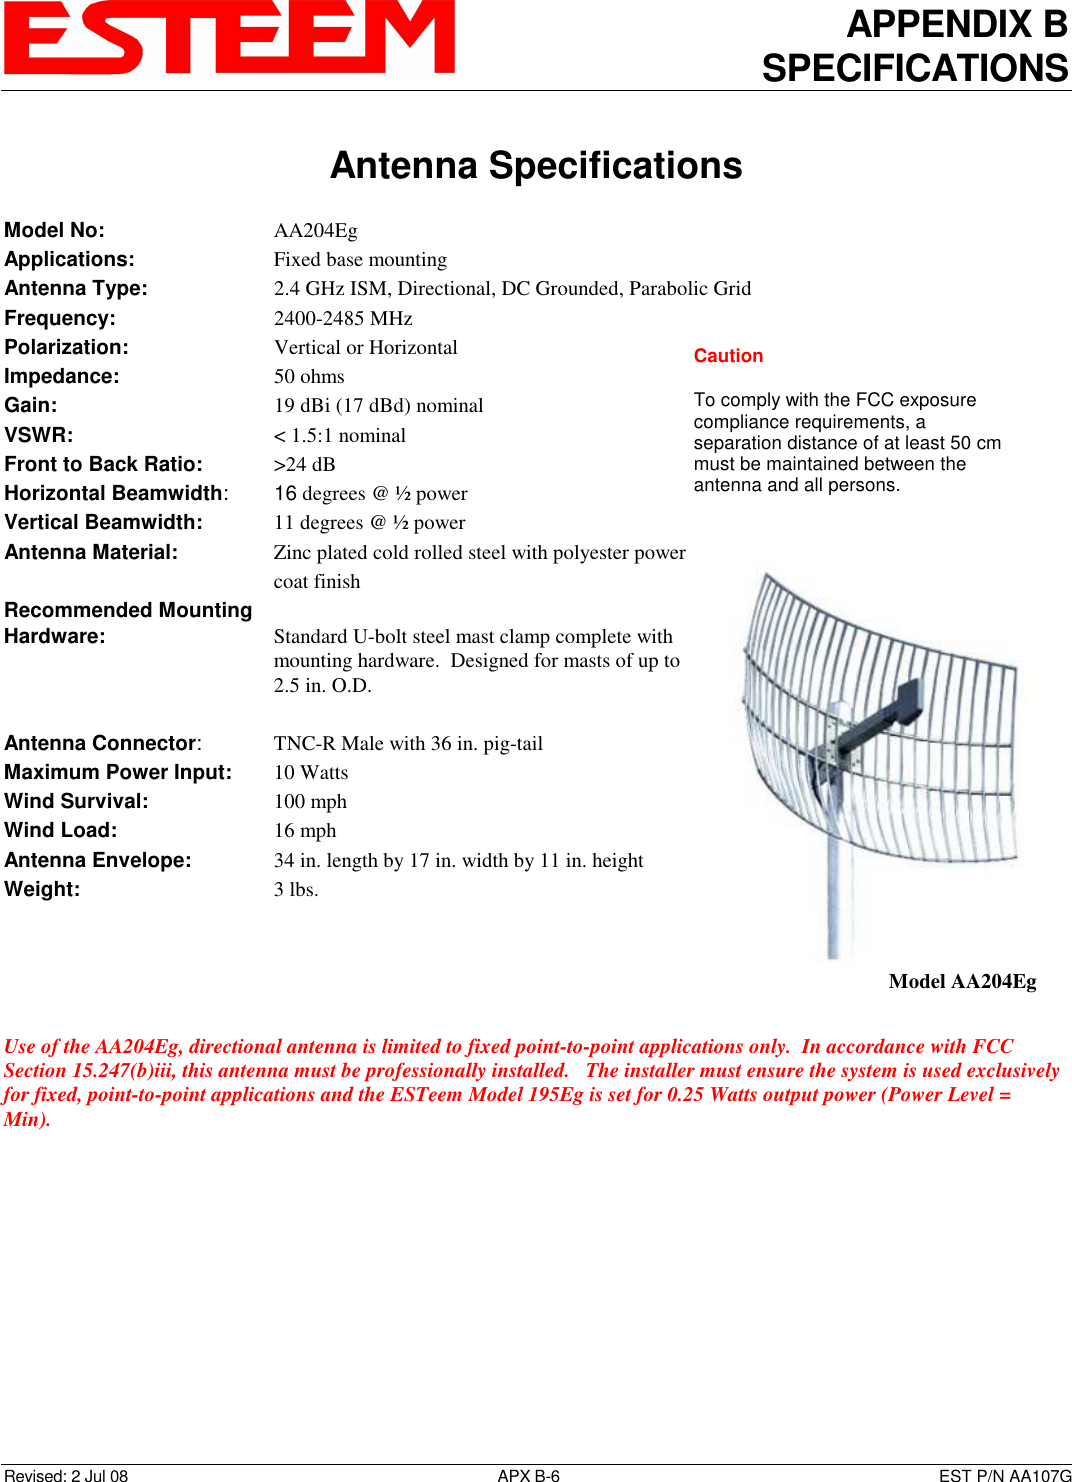 APPENDIX B SPECIFICATIONS   Antenna Specifications  Revised: 2 Jul 08  APX B-6  EST P/N AA107G Model No:        AA204Eg Applications:         Fixed base mounting  Antenna Type:      2.4 GHz ISM, Directional, DC Grounded, Parabolic Grid Frequency:        2400-2485 MHz Polarization:        Vertical or Horizontal Impedance:        50 ohms Gain:     19 dBi (17 dBd) nominal VSWR:            &lt; 1.5:1 nominal  Front to Back Ratio:     &gt;24 dB Horizontal Beamwidth:   16 degrees @ ½ power Vertical Beamwidth:      11 degrees @ ½ power Antenna Material:      Zinc plated cold rolled steel with polyester power coat finish Recommended Mounting  Hardware:        Standard U-bolt steel mast clamp complete with mounting hardware.  Designed for masts of up to 2.5 in. O.D.  Antenna Connector:    TNC-R Male with 36 in. pig-tail Maximum Power Input:     10 Watts Wind Survival:        100 mph Wind Load:          16 mph Antenna Envelope:    34 in. length by 17 in. width by 11 in. height Weight:           3 lbs.      Use of the AA204Eg, directional antenna is limited to fixed point-to-point applications only.  In accordance with FCC Section 15.247(b)iii, this antenna must be professionally installed.   The installer must ensure the system is used exclusively for fixed, point-to-point applications and the ESTeem Model 195Eg is set for 0.25 Watts output power (Power Level = Min).   Model AA204Eg Caution  To comply with the FCC exposure compliance requirements, a separation distance of at least 50 cm must be maintained between the antenna and all persons. 